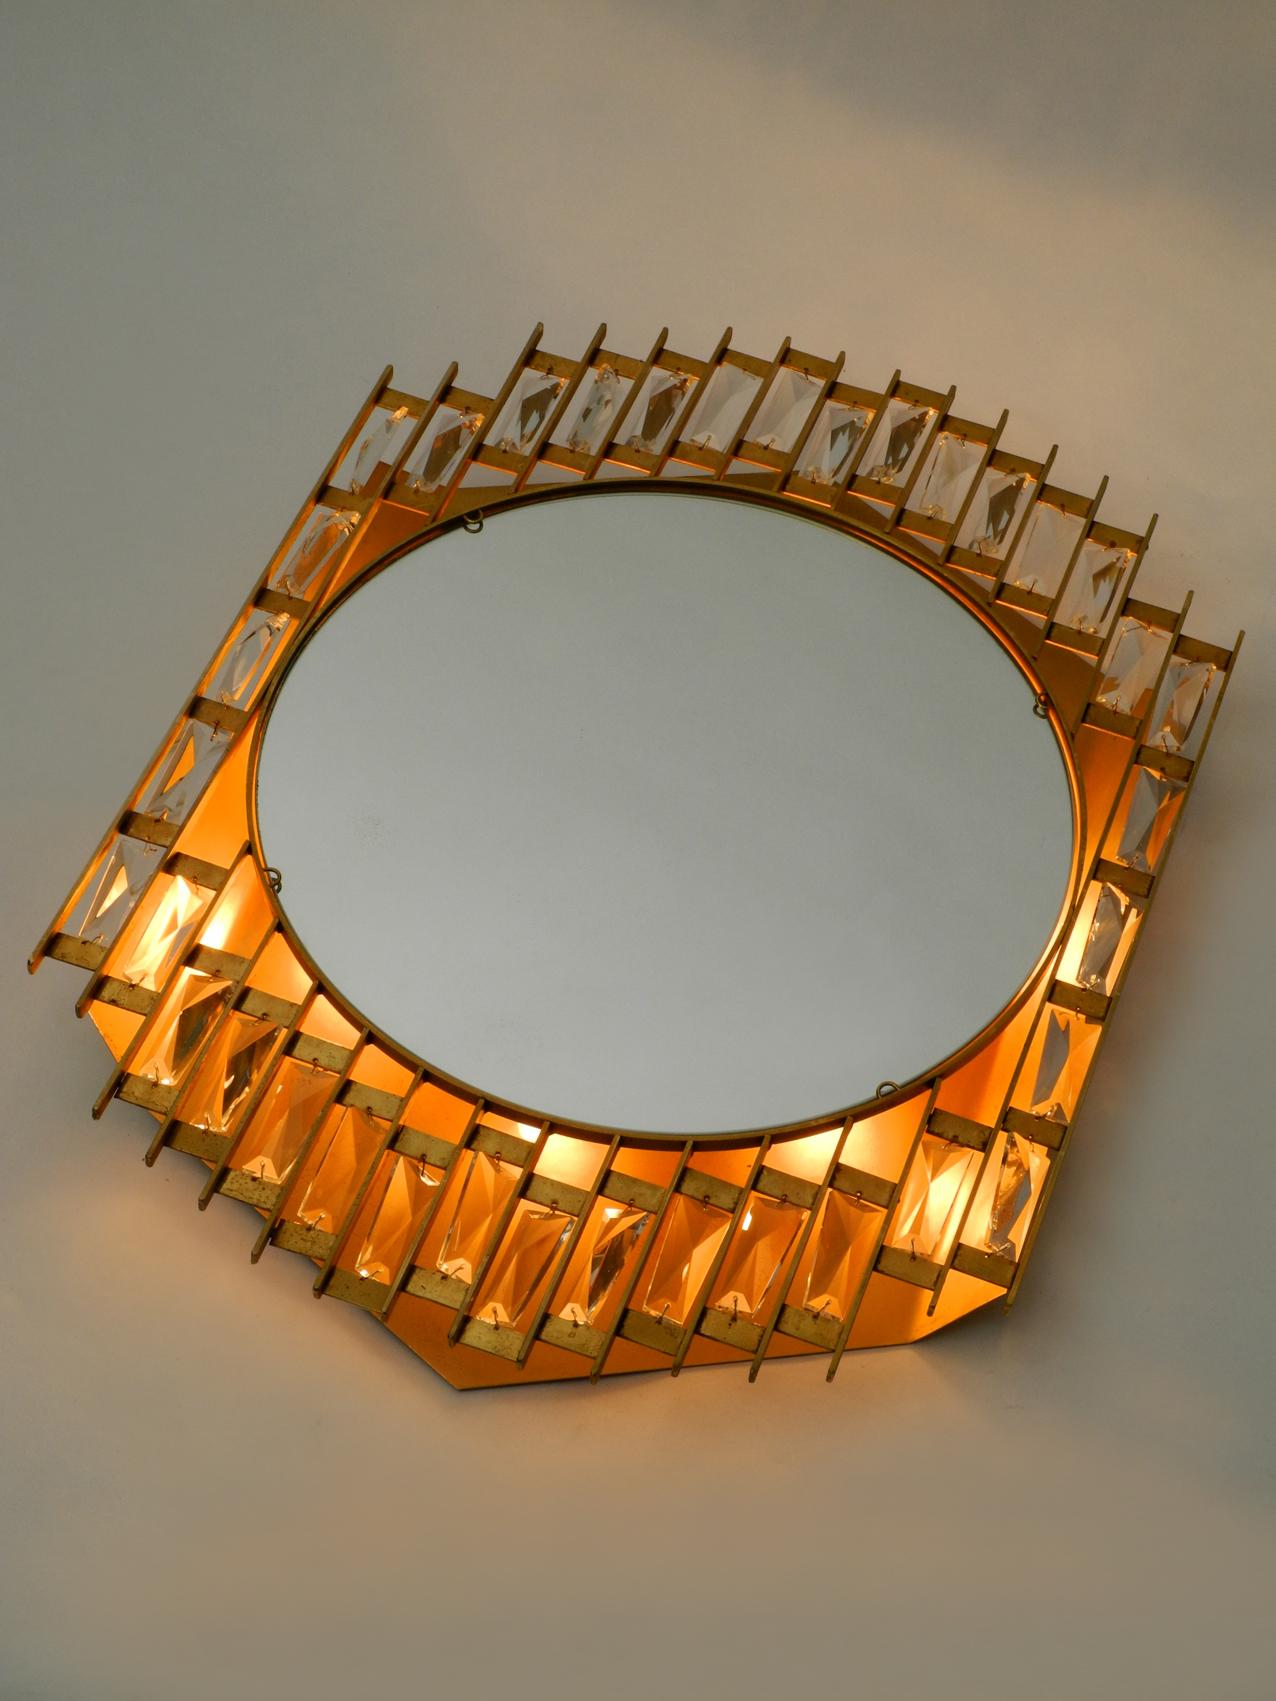 Mid-20th Century 1960s Golden Brutalist Design Wall Backlit Mirror by Hillebrand Made of Metal